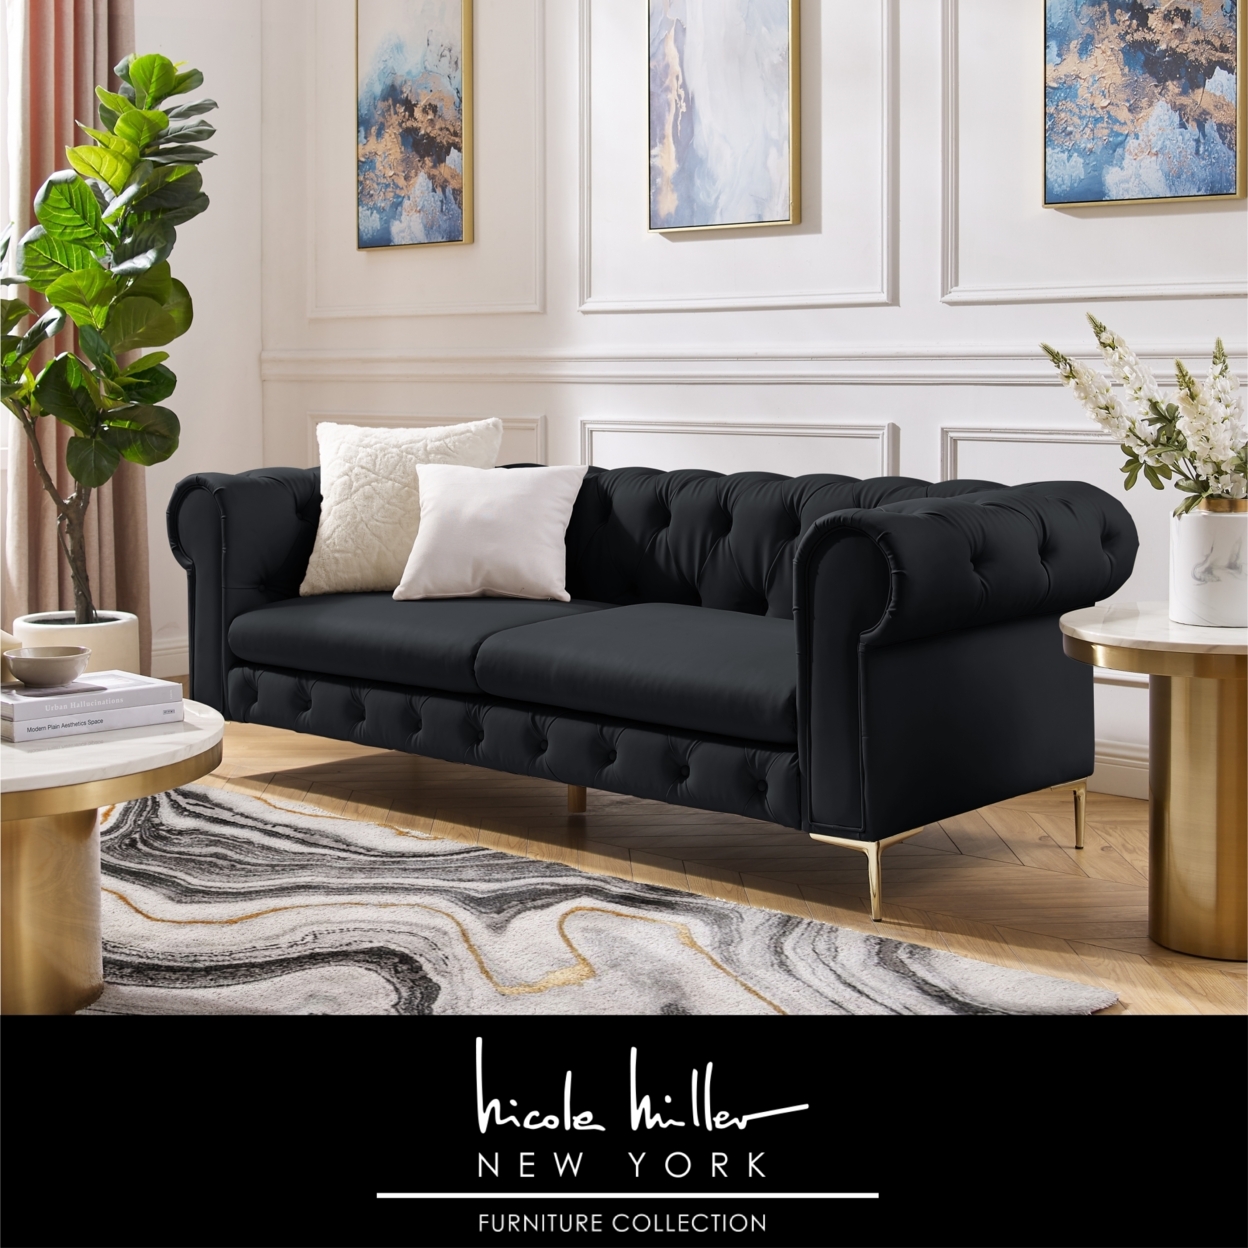 Laci Sofa - Button Tufted, 3 Seat - Rolled Arms - Y Leg, Sinuous Springs - Black